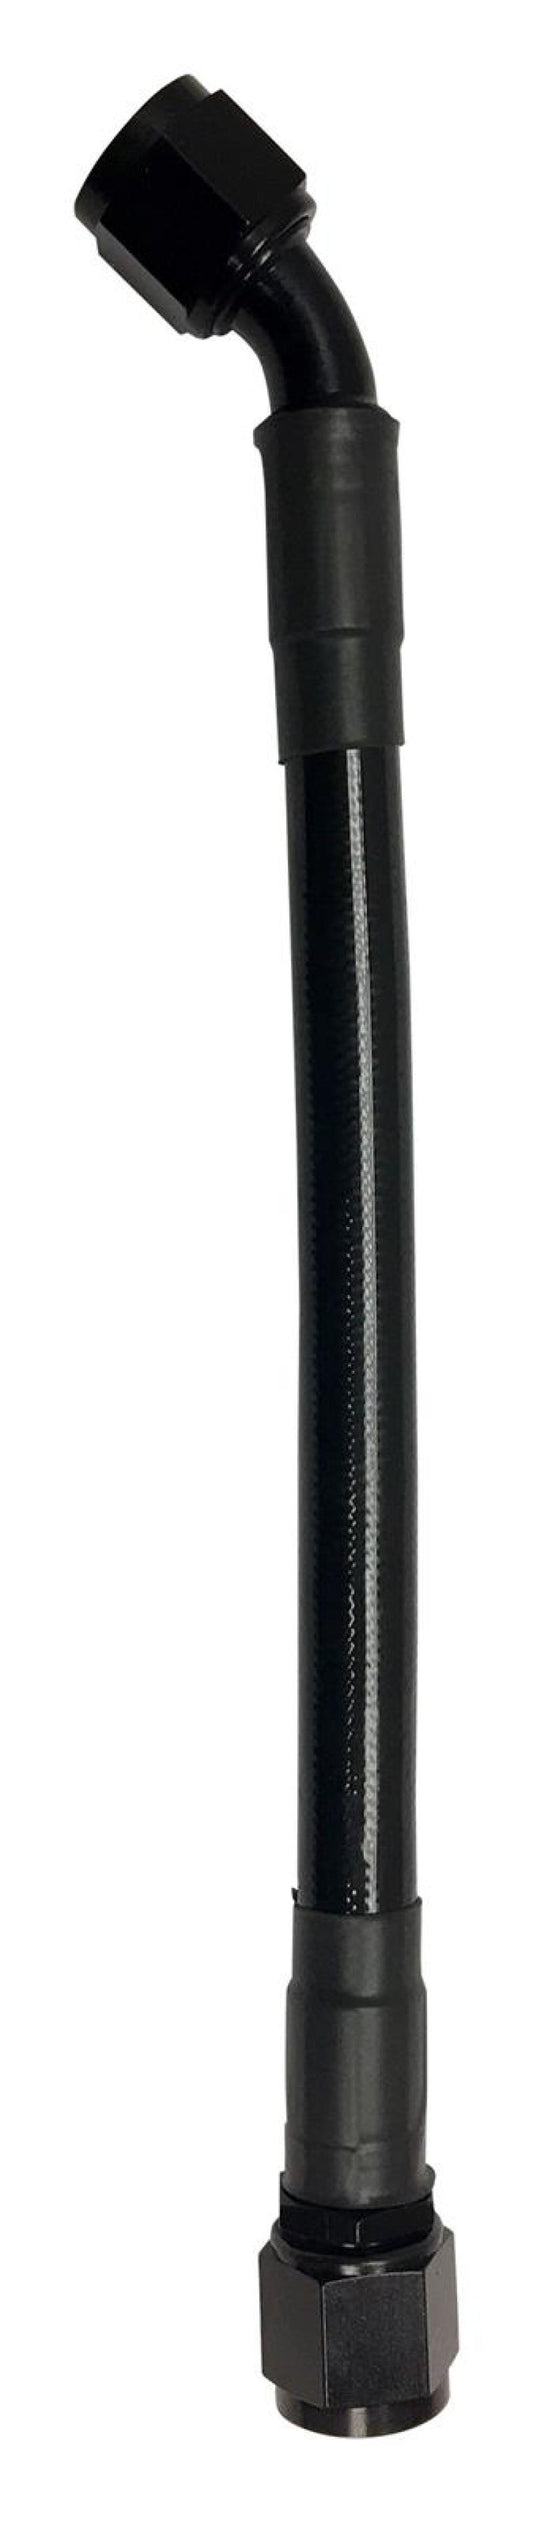 Fragola -10AN Ext Black PTFE Hose Assembly Straight x 45 Degree 48in